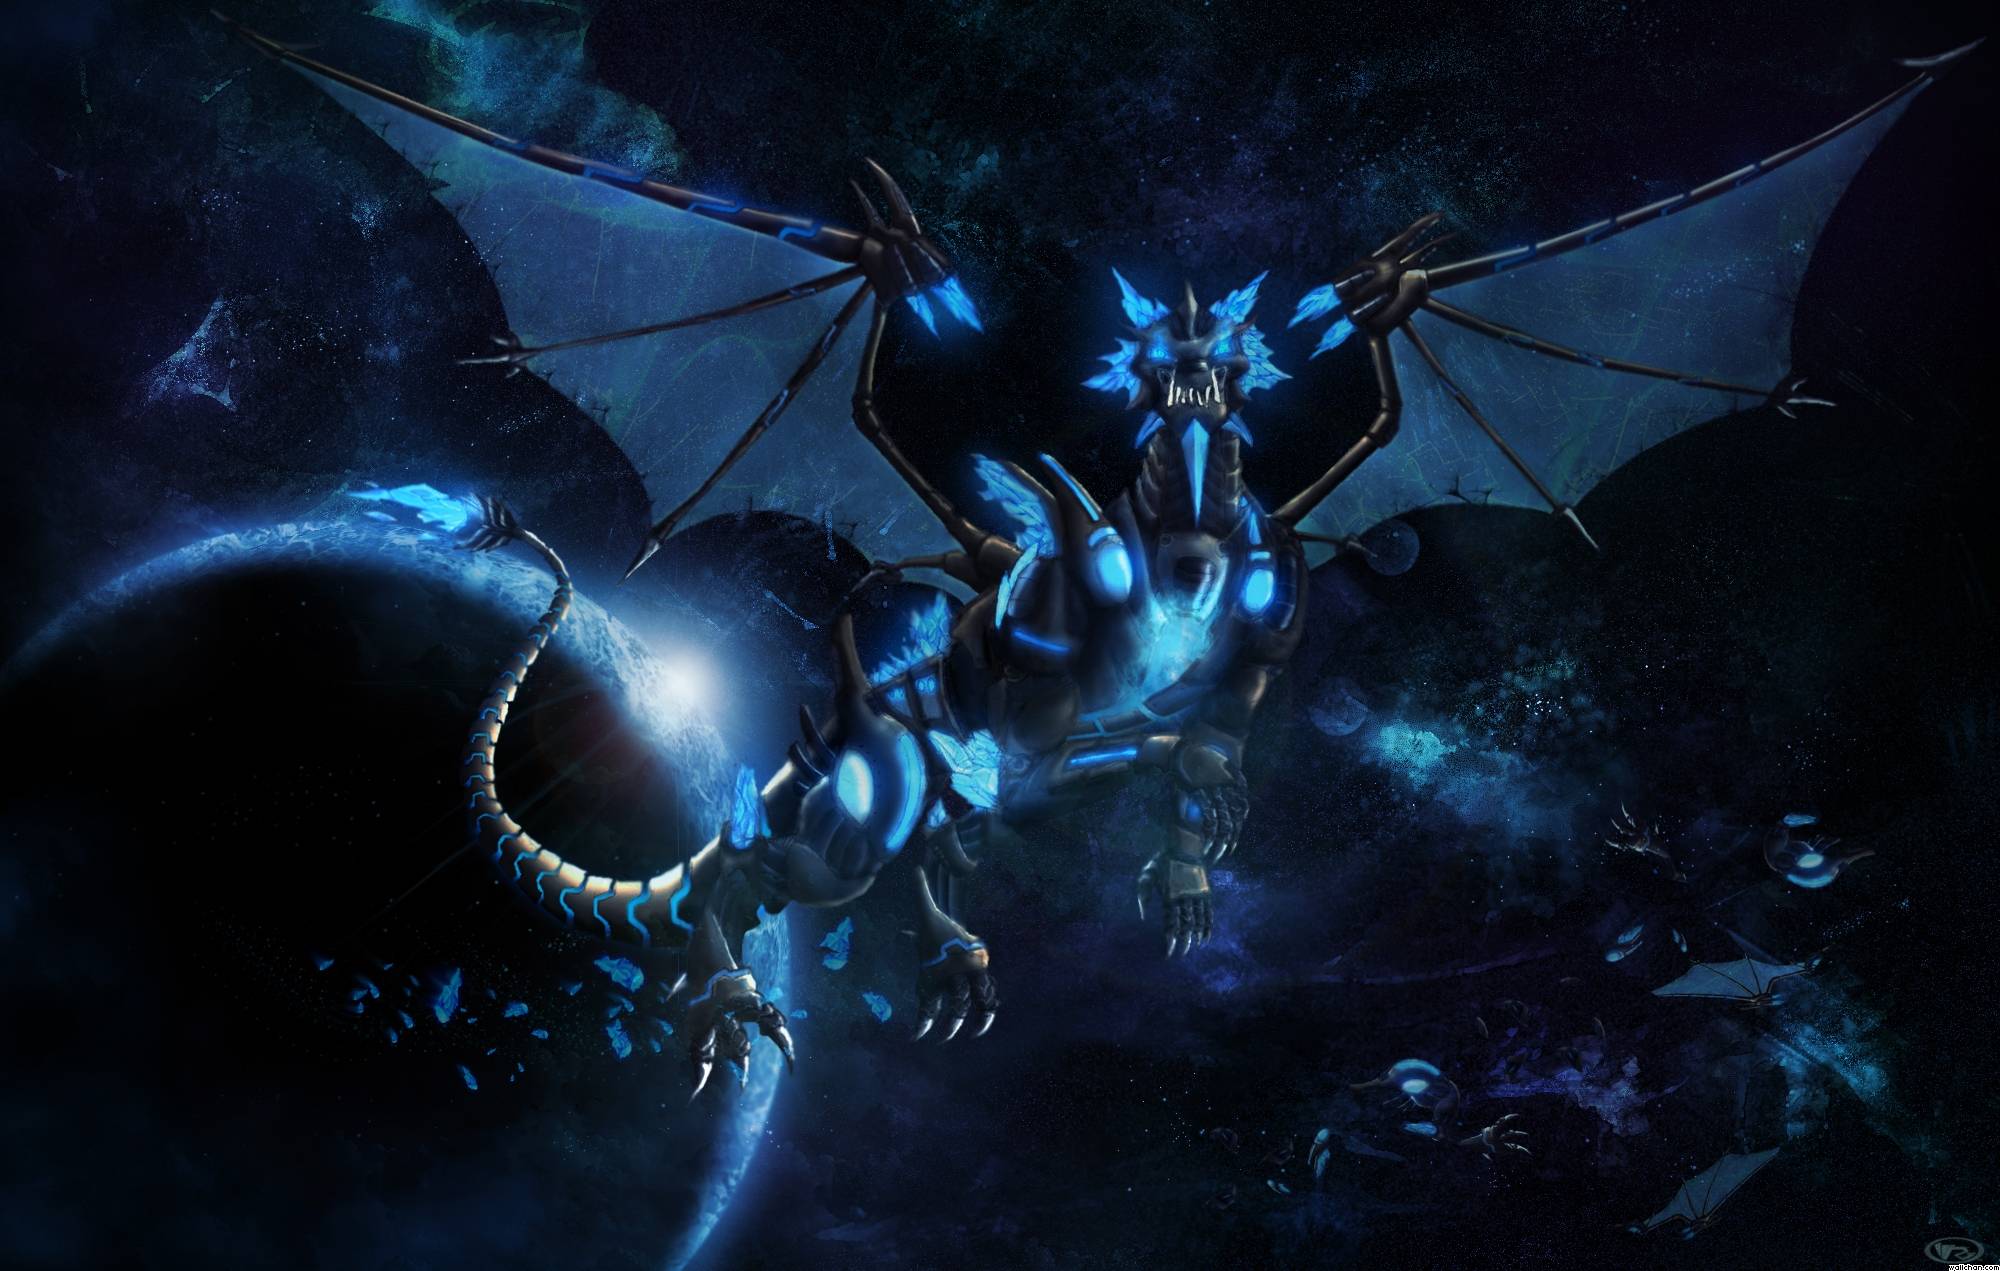 image For > Cool Blue Dragon Wallpaper